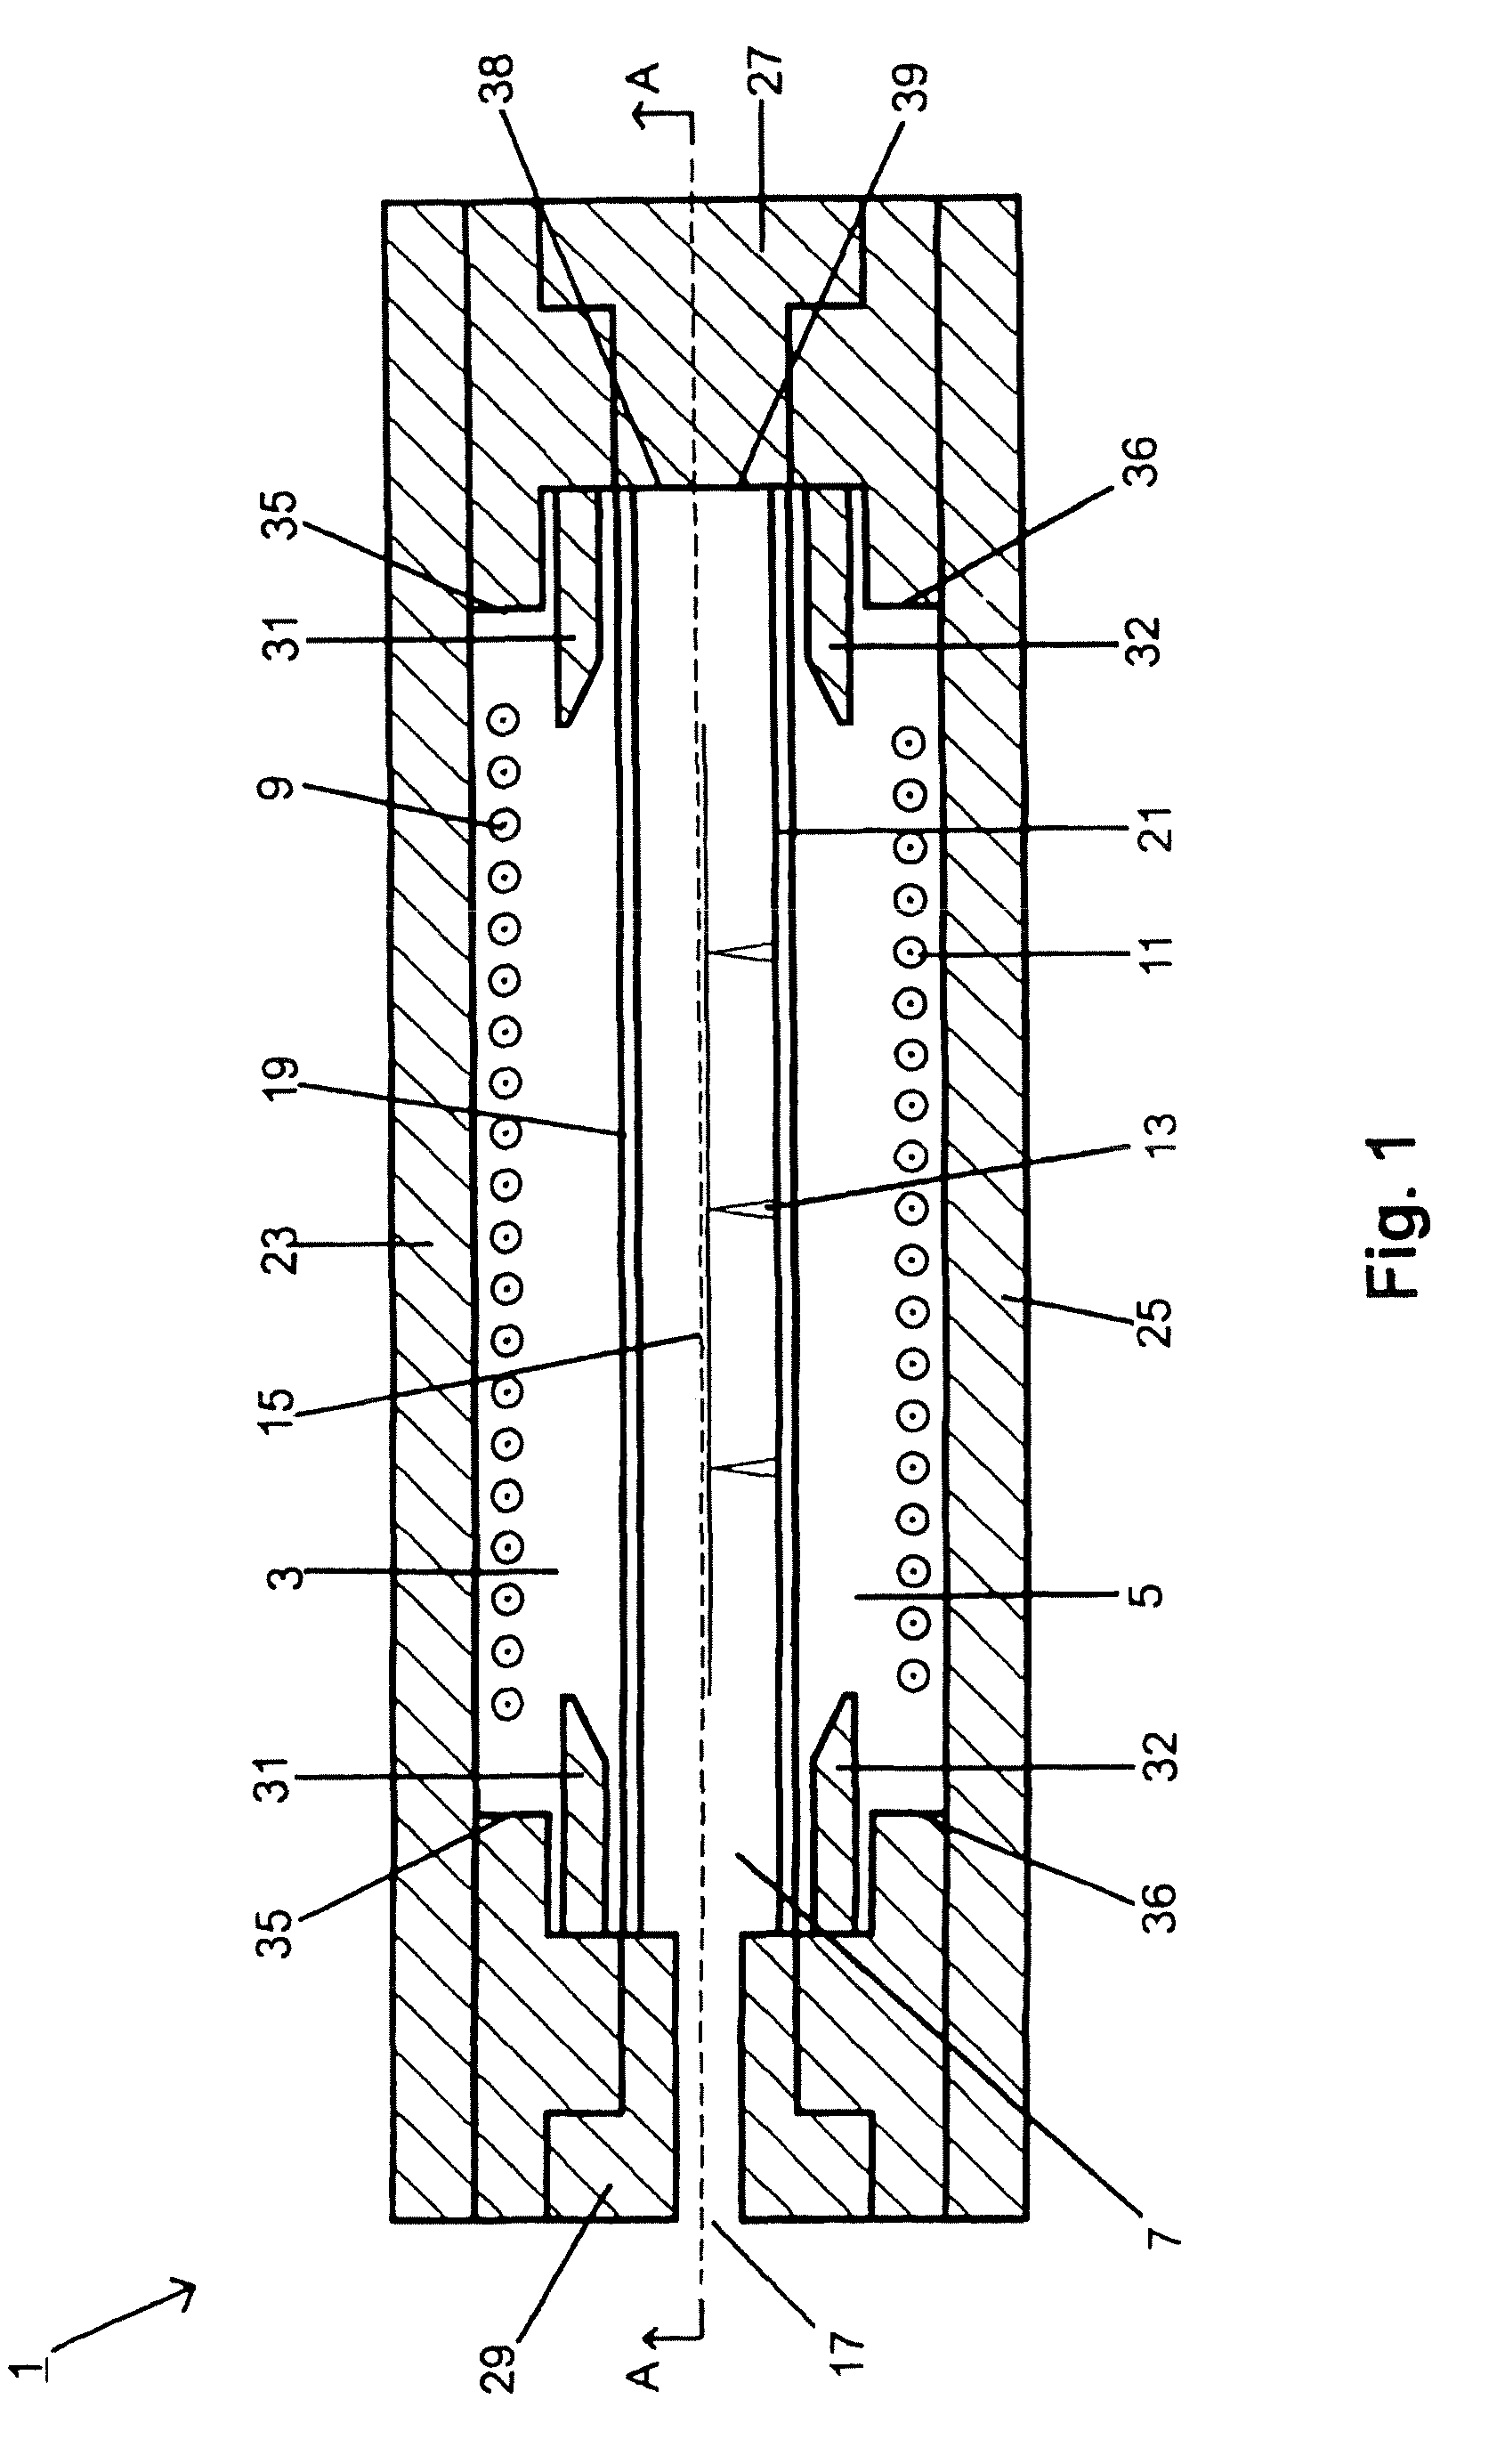 Apparatus for thermally treating semiconductor substrates